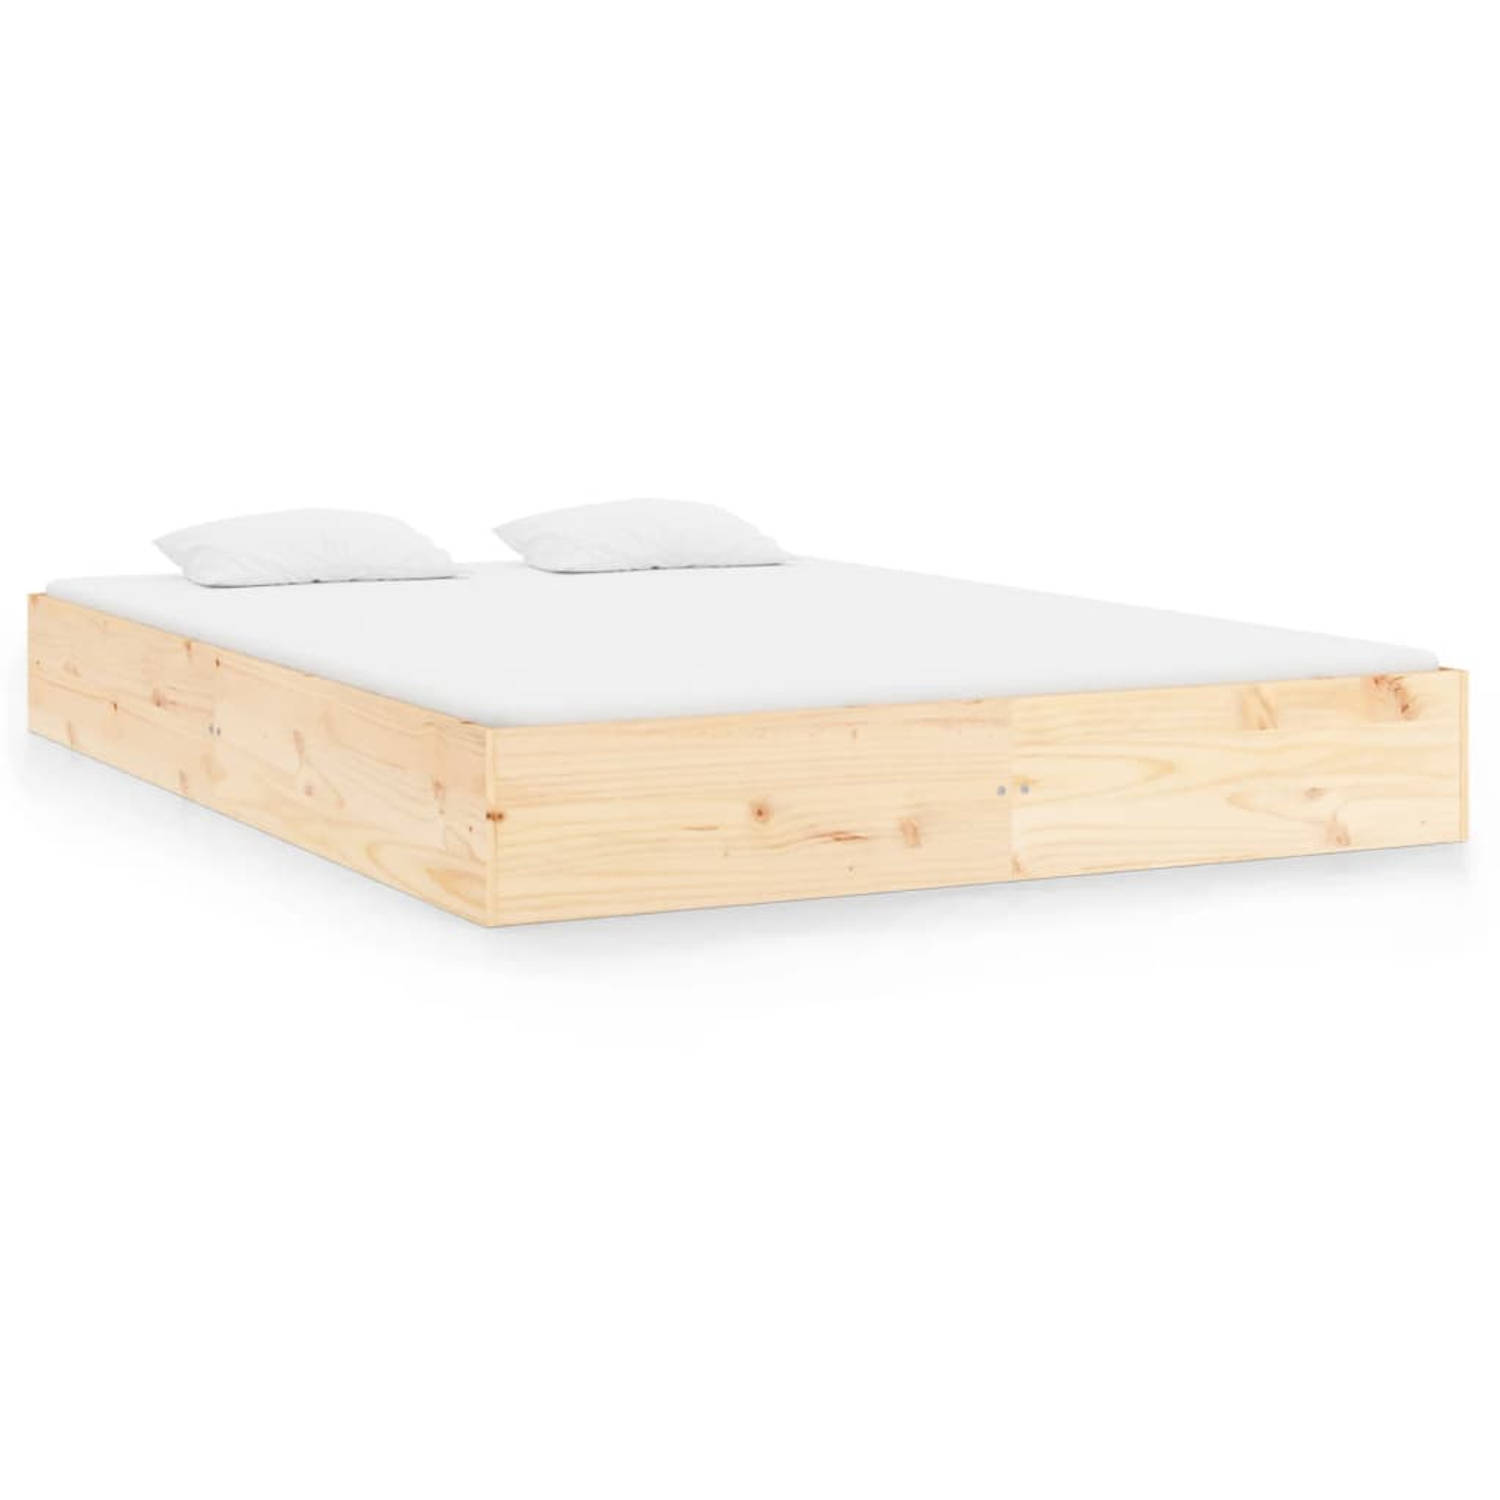 The Living Store Bedframe massief hout 150x200 cm 5FT King Size - Bed